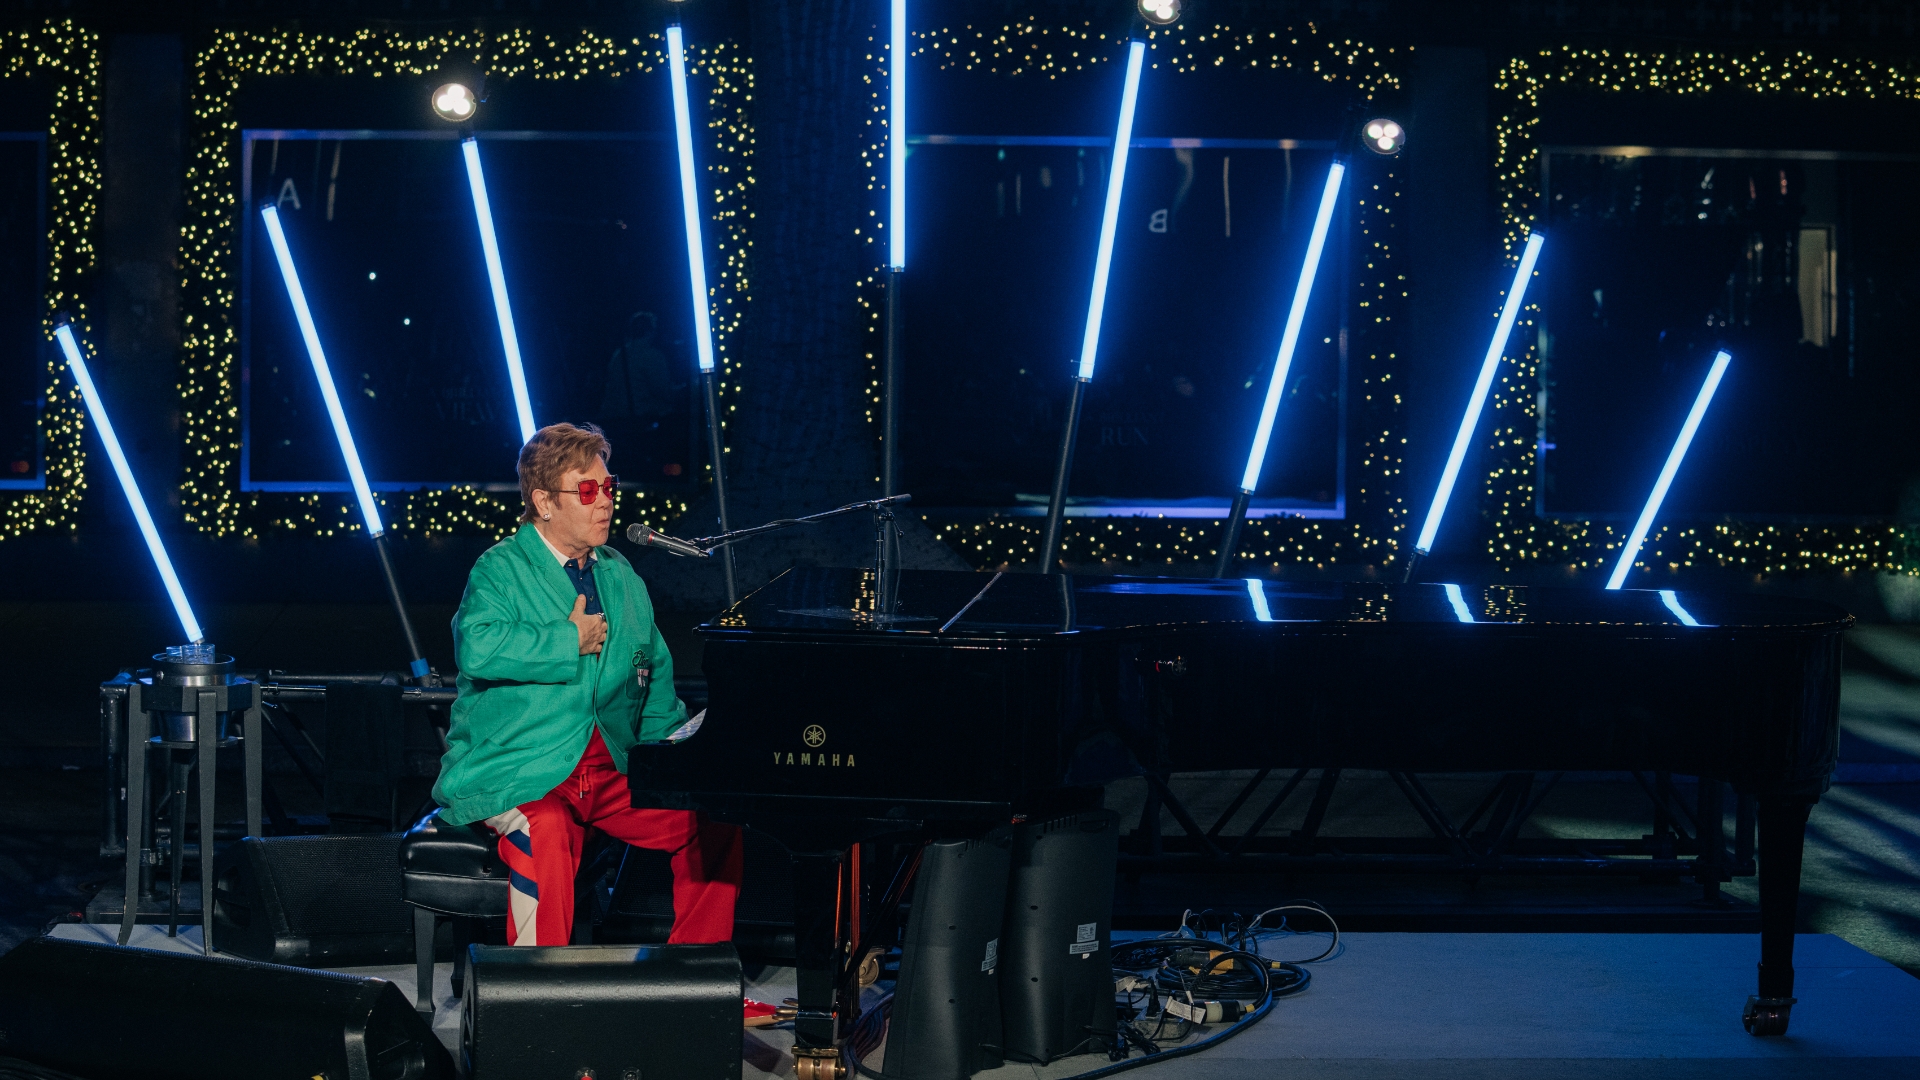 Elton John Says Farewell with Final Dodger Stadium Show: Review